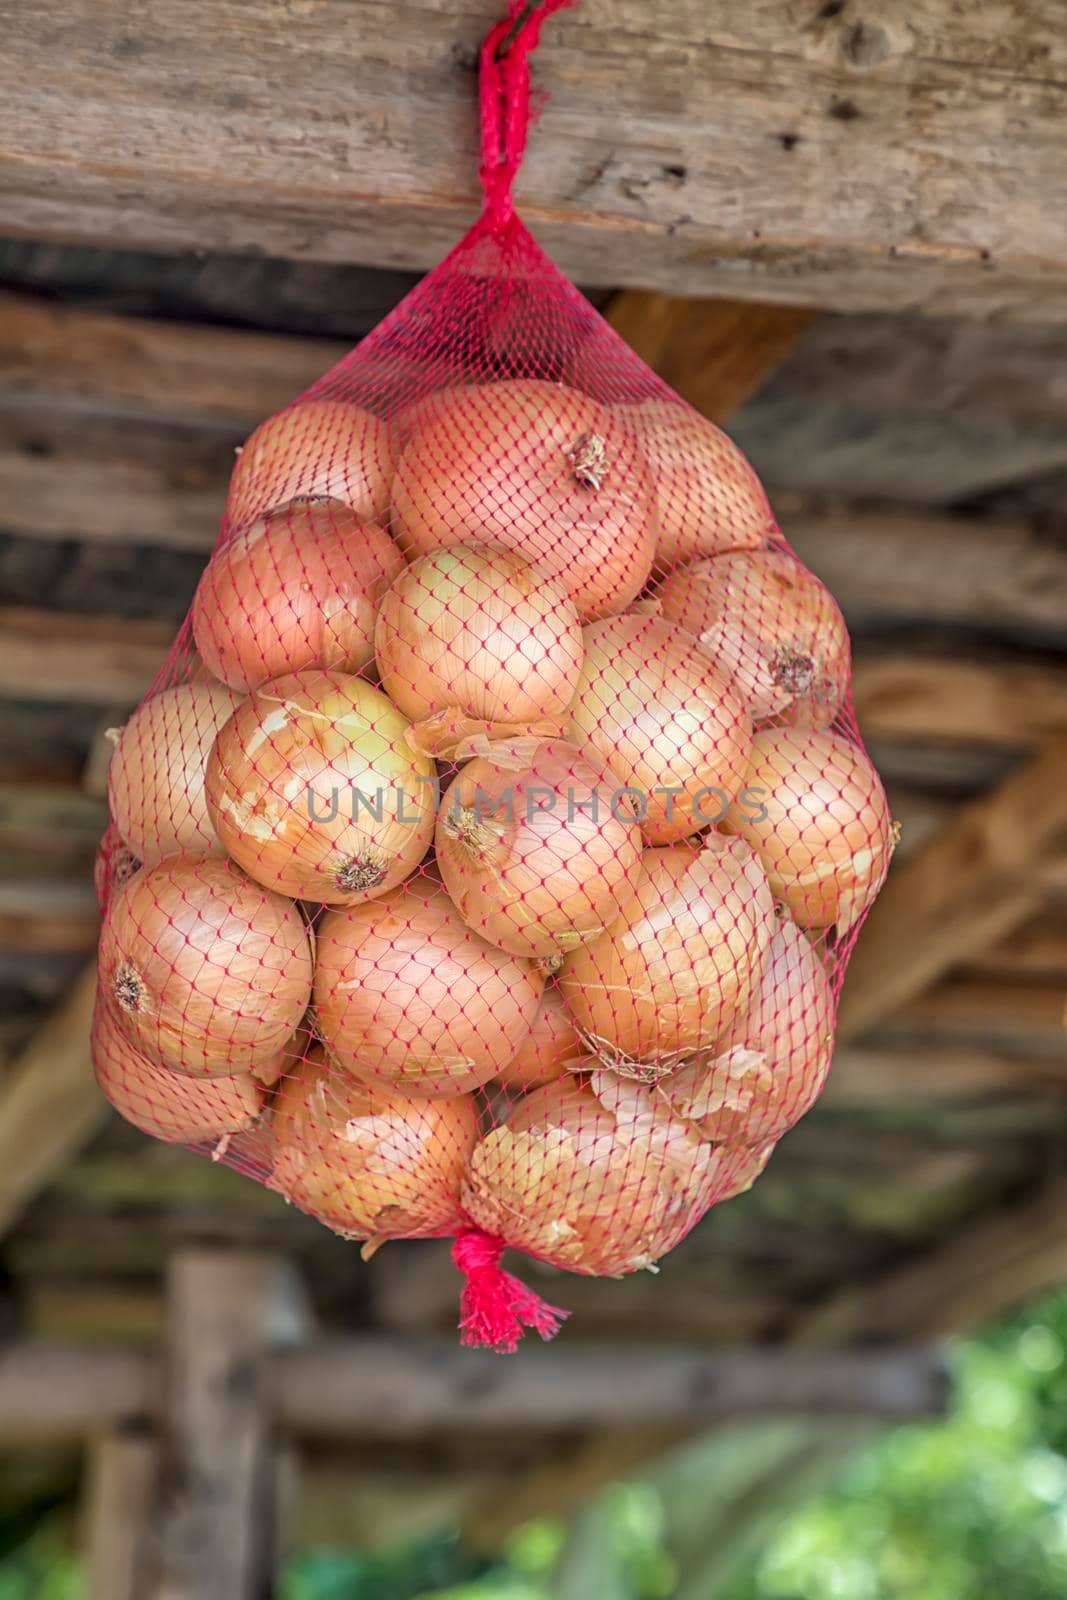 Organic yellow onion in the bag at a market by EdVal